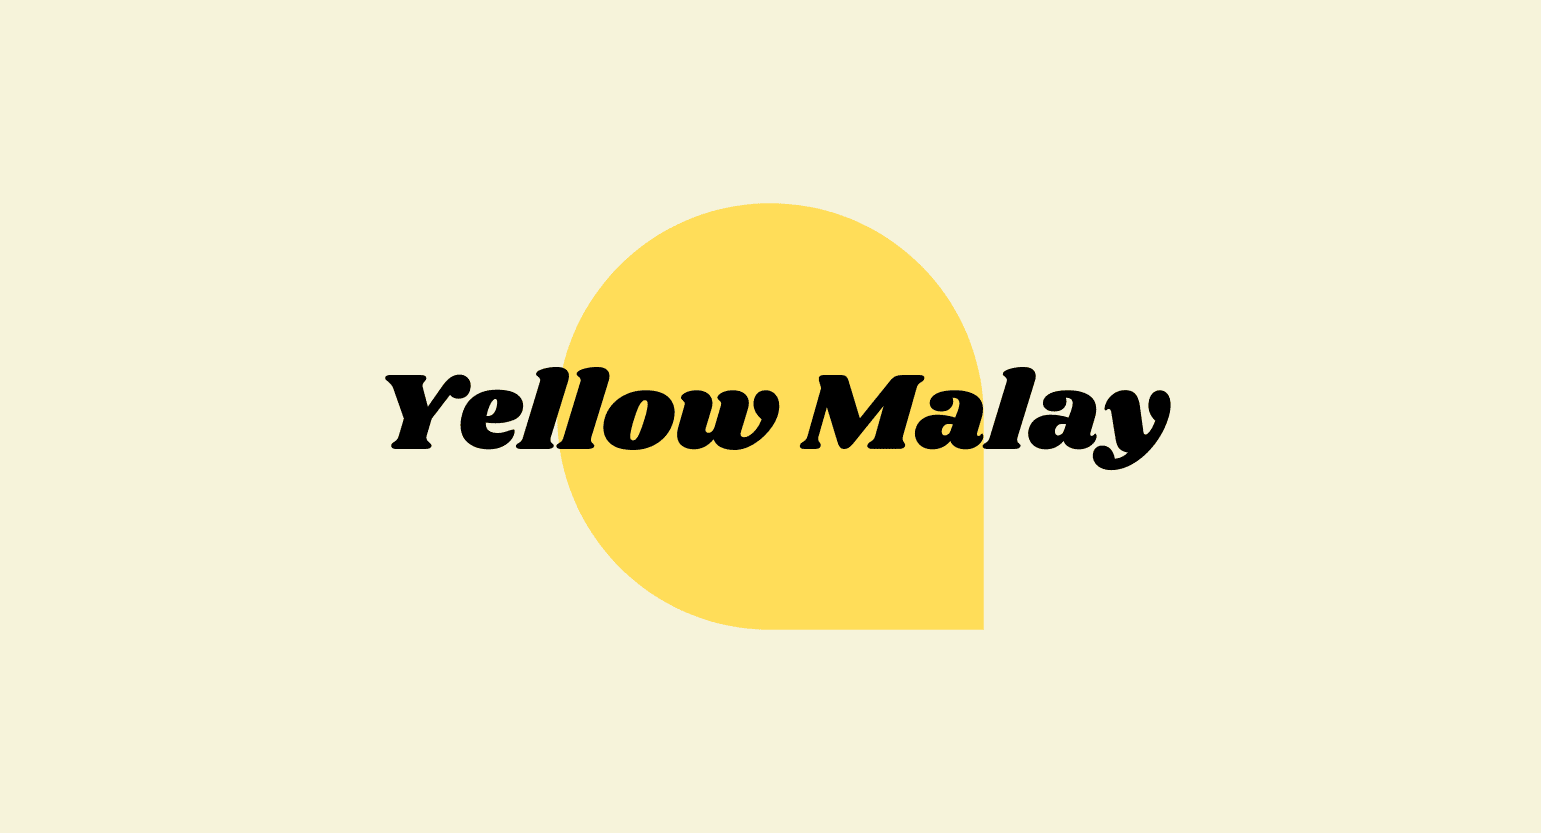 Yellow Malay Kratom: Is This The Best Strain For Energy & Focus?